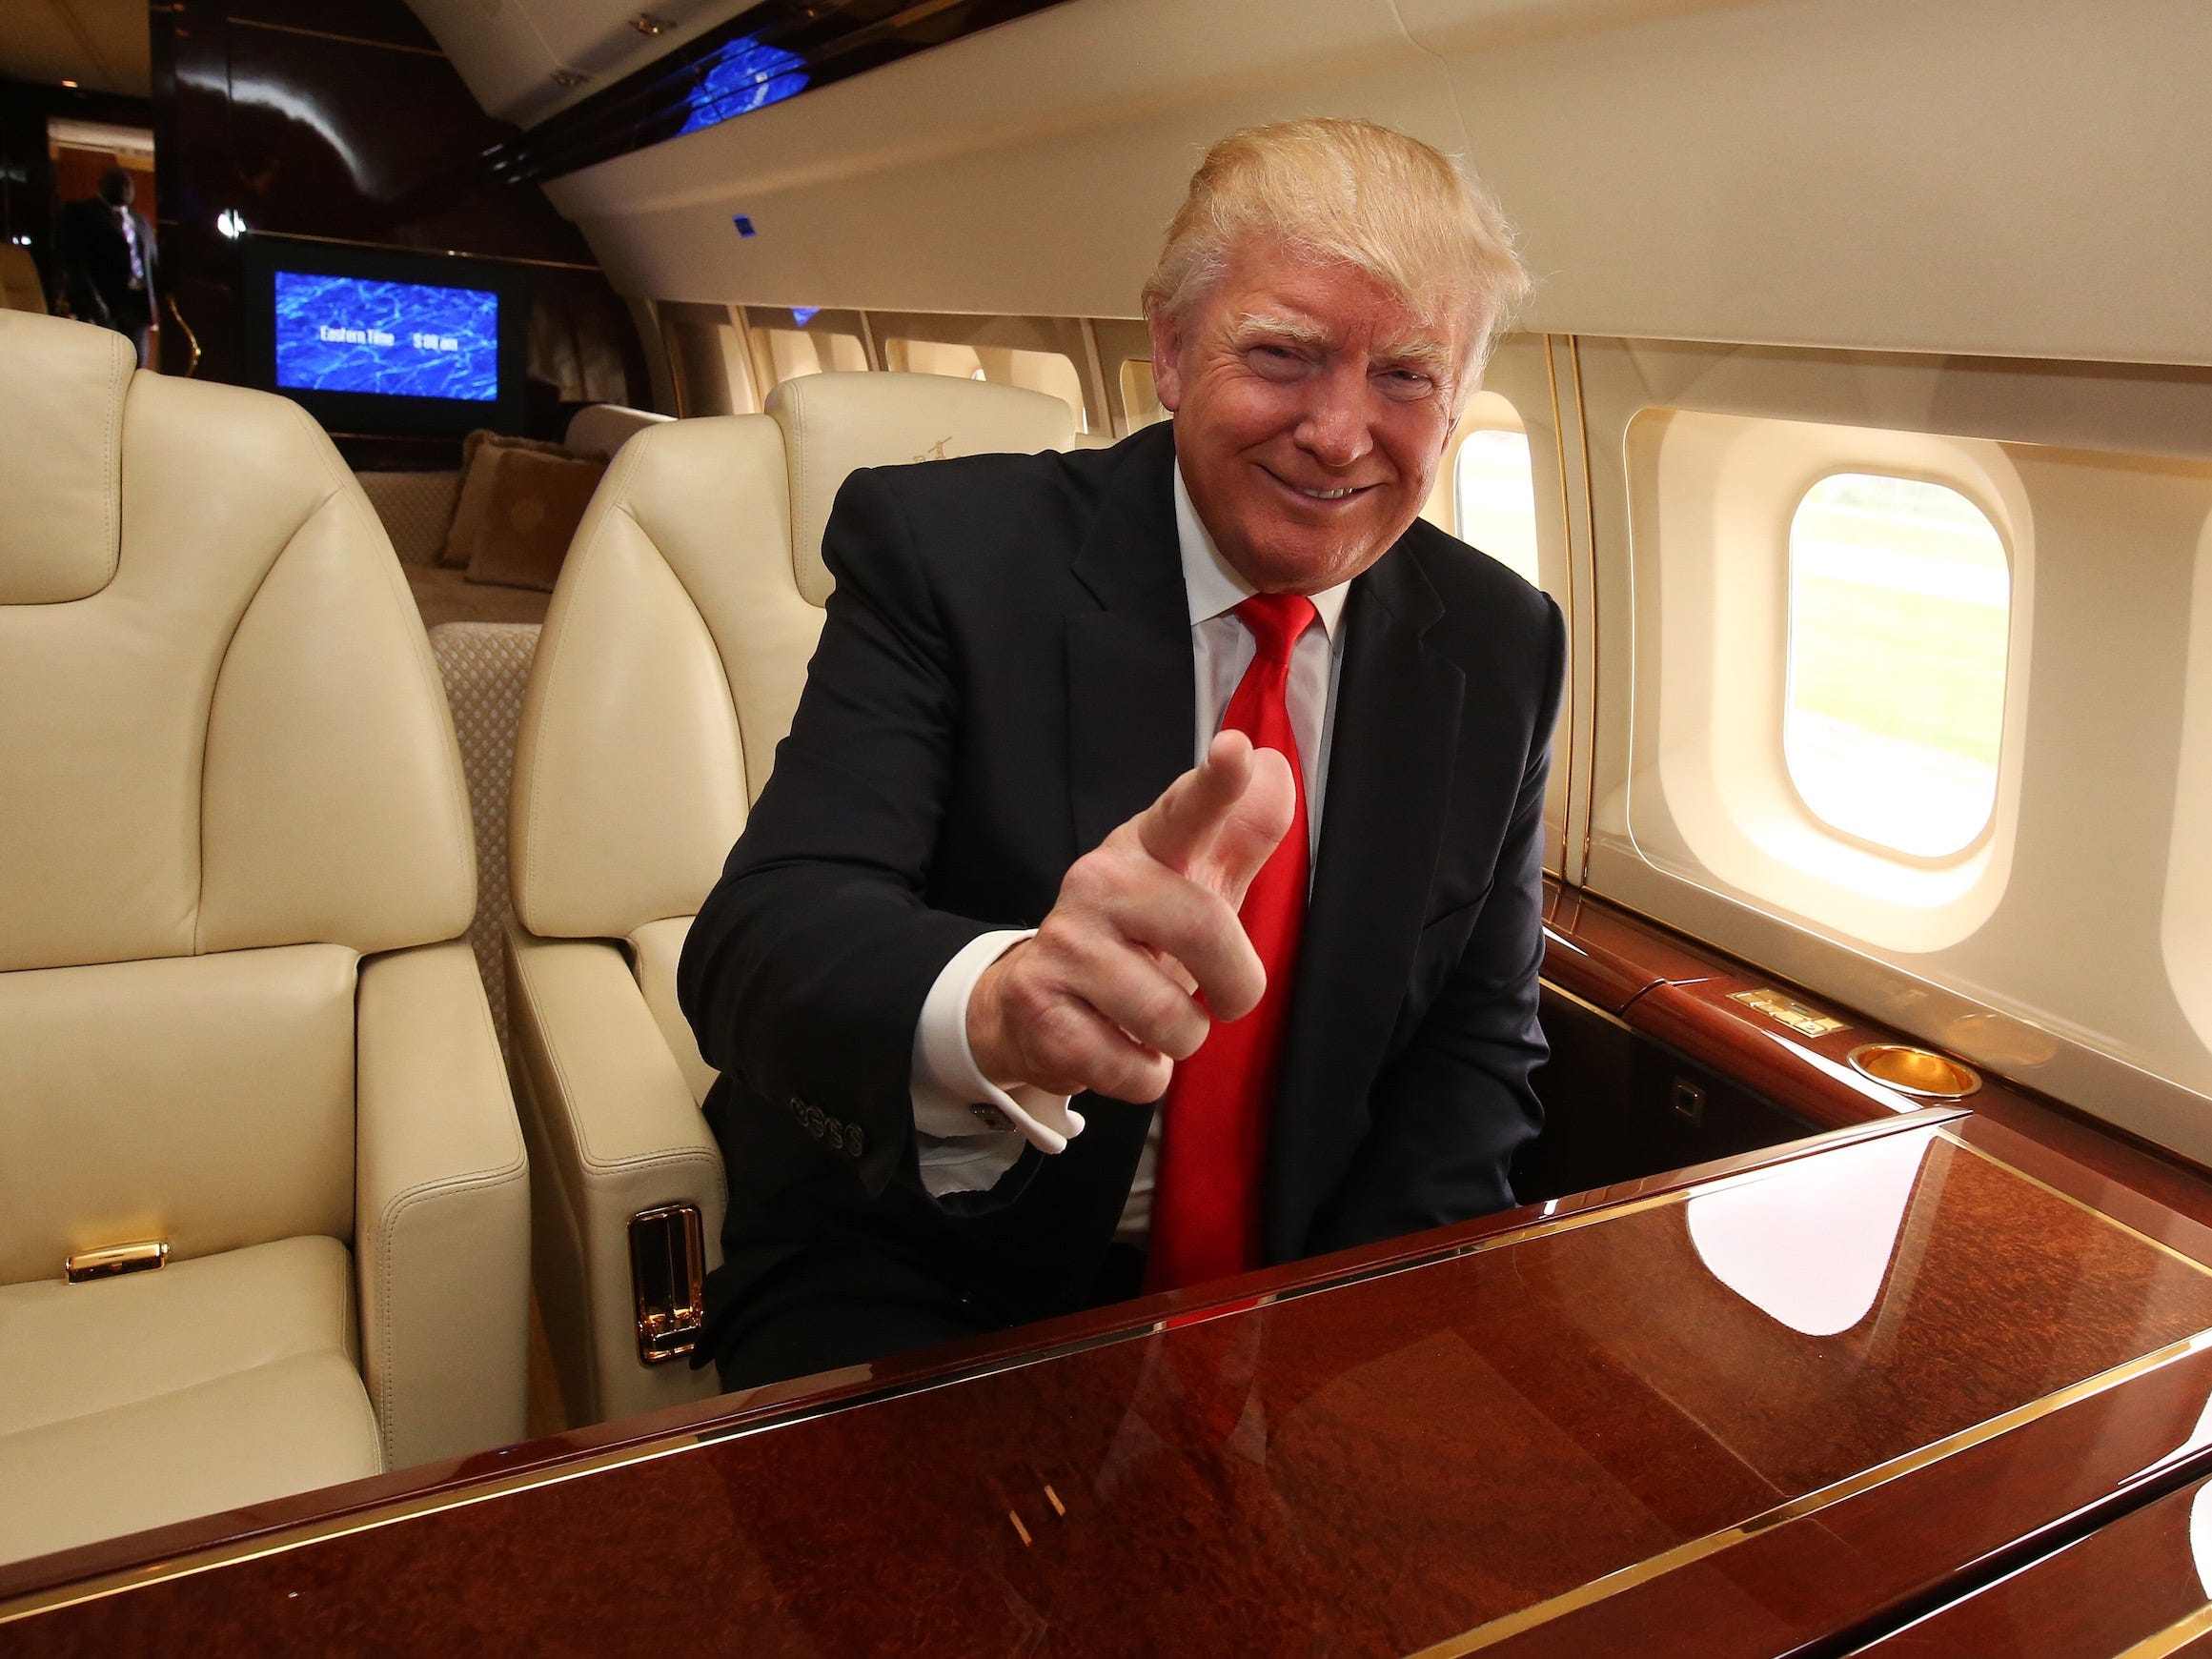 Trump onboard his Boeing 757 private jet.